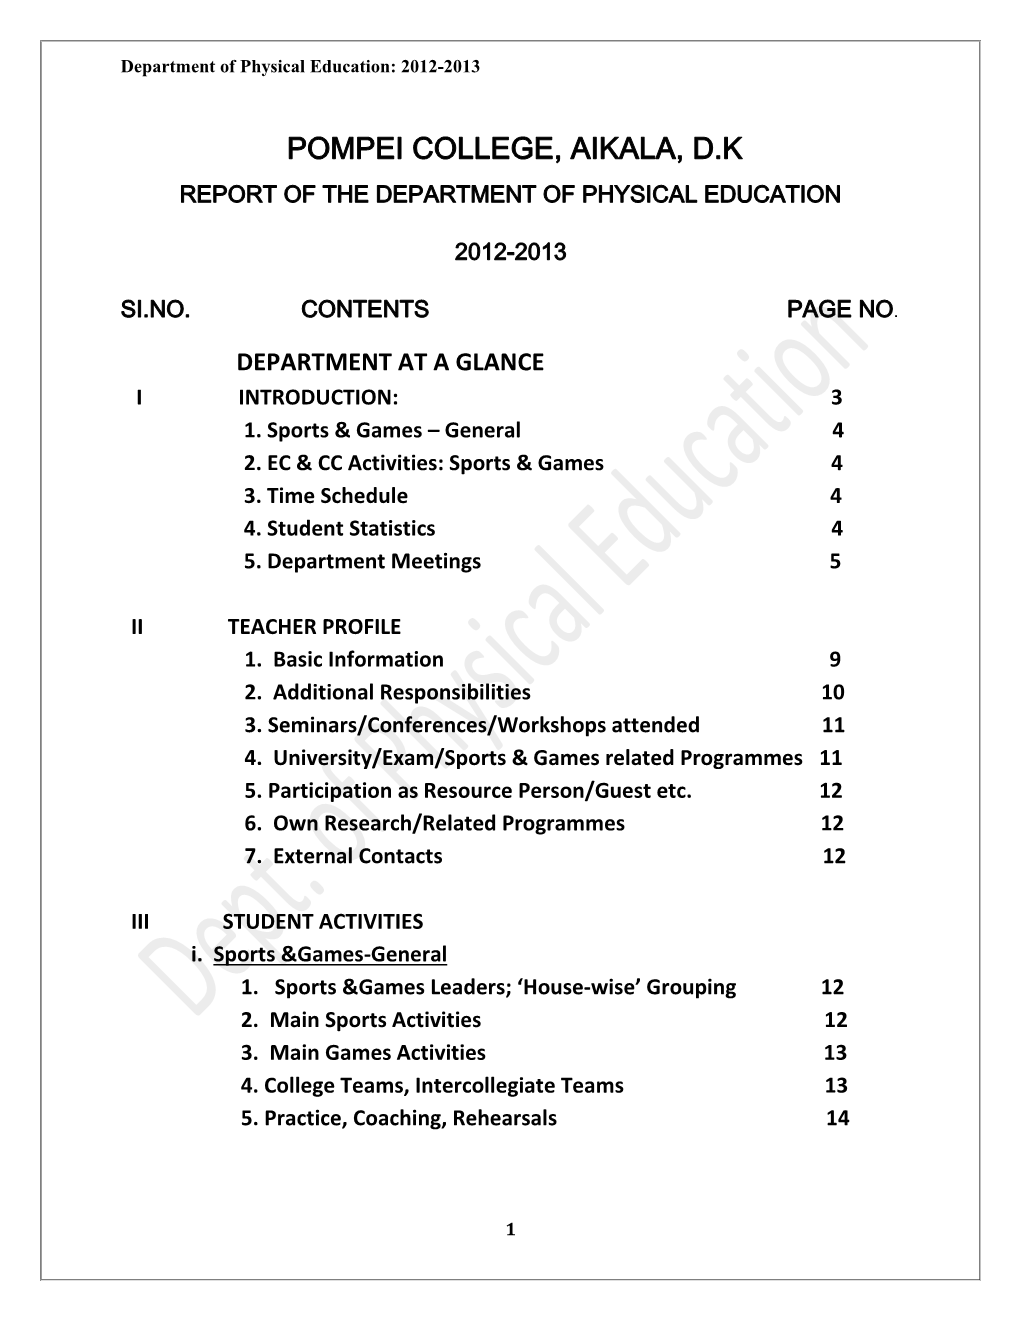 Pompei College, Aikala, D.K Report of the Department of Physical Education